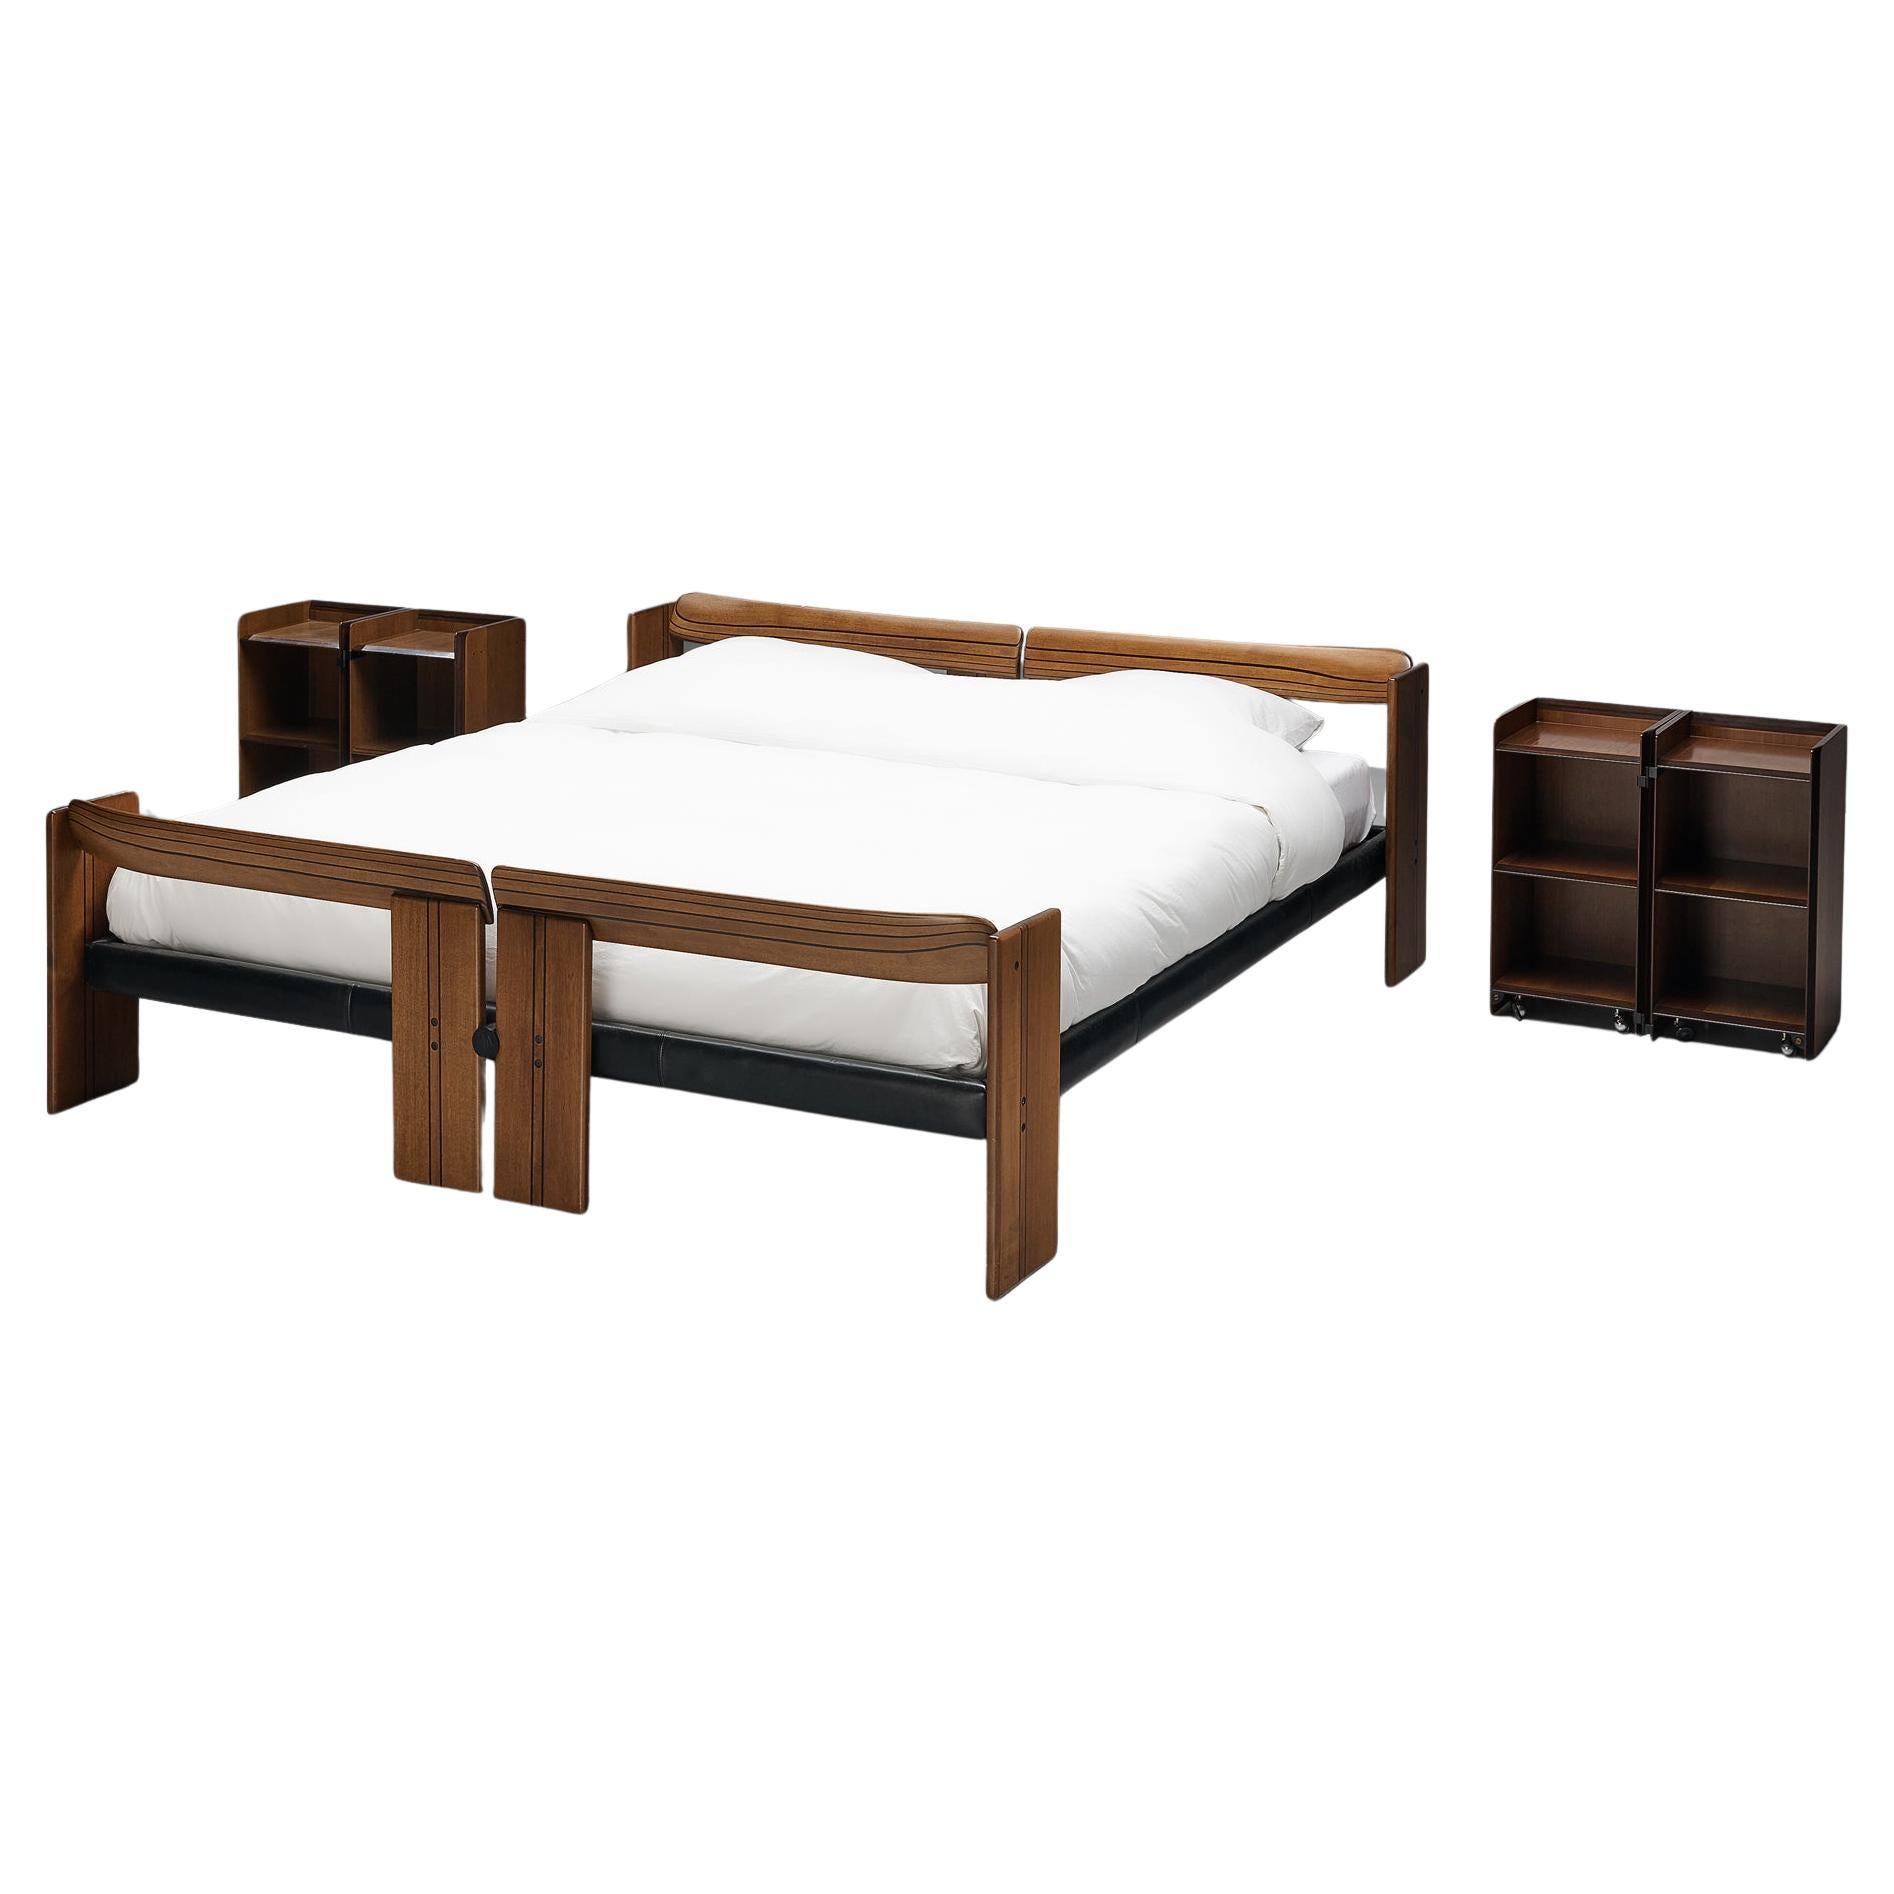 Private listing for Cassie: Scarpa bed + nightstands